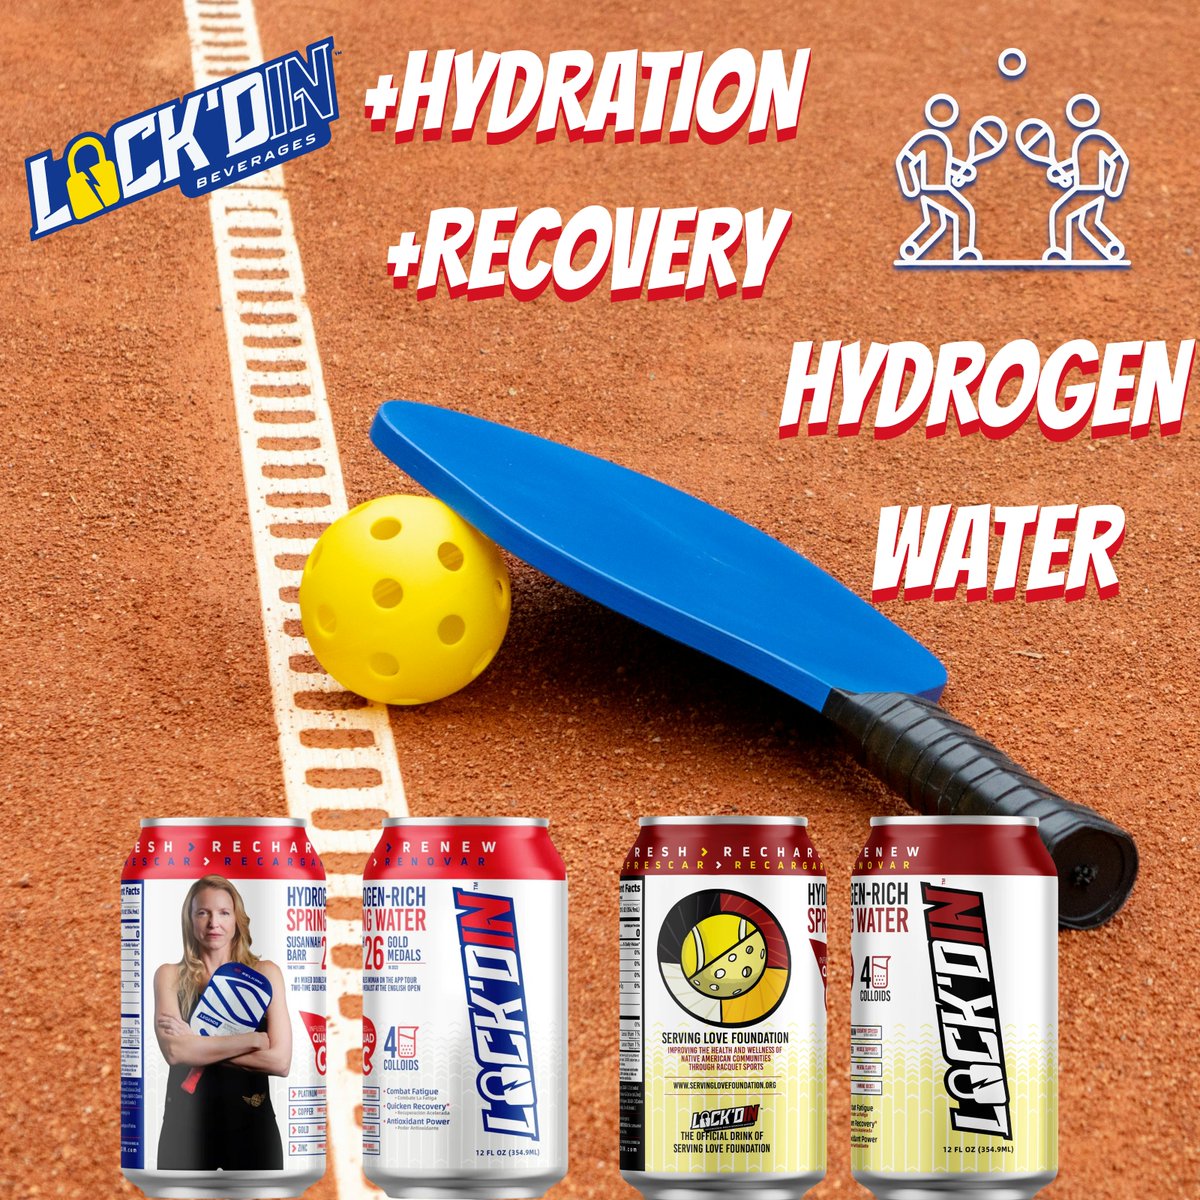 Pickleball players are increasingly recognizing the benefits of staying #hydrated and #recovering faster by incorporating @livelockdin @lockdinjoe @lockdinnews #hydrogen #water into their routine, leading to improved performance on the court. #Lockdin beverages is embracing the…